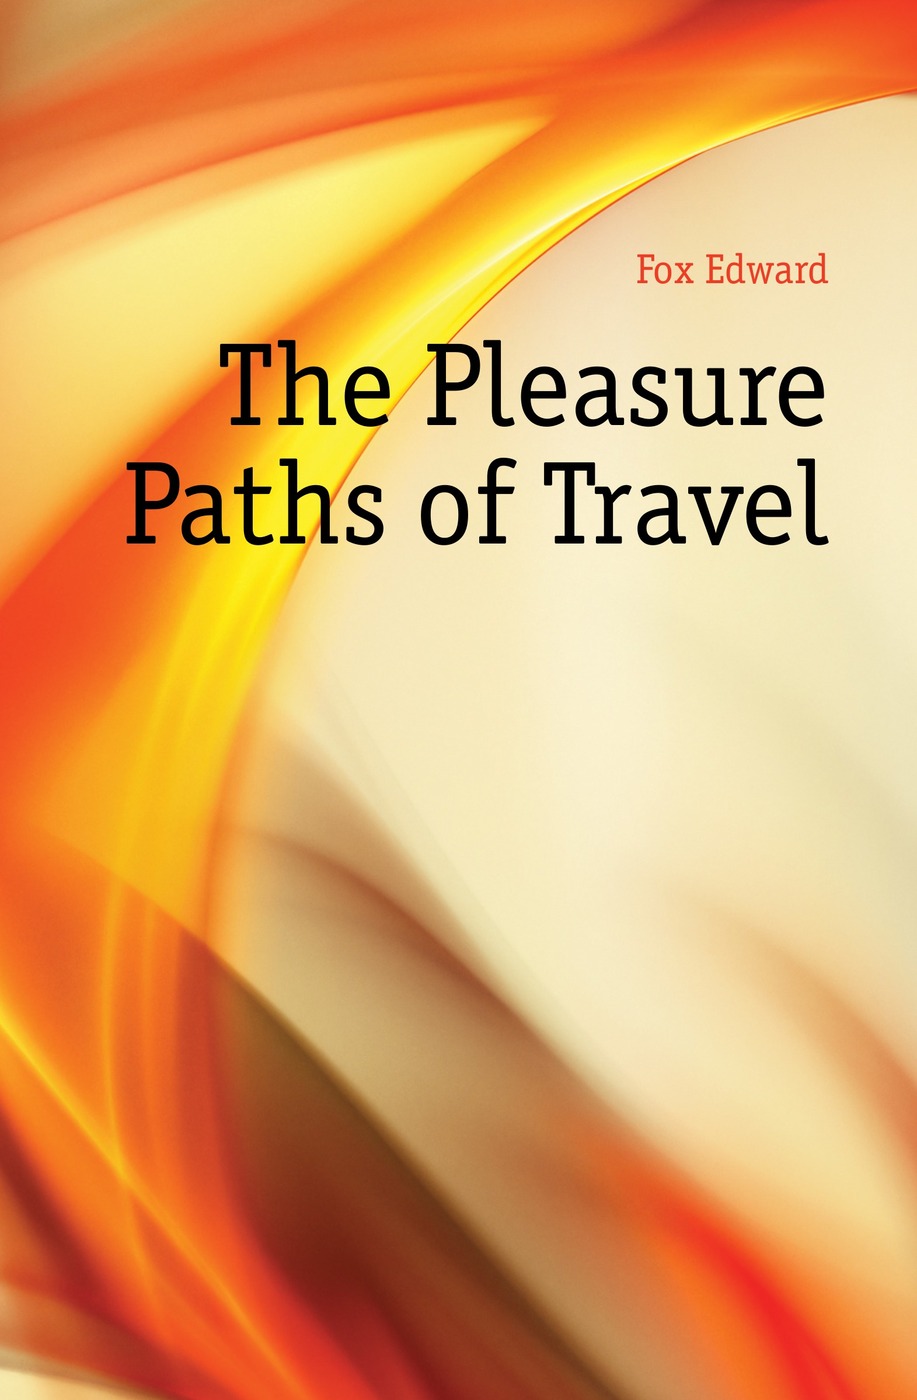 The Pleasure Paths of Travel